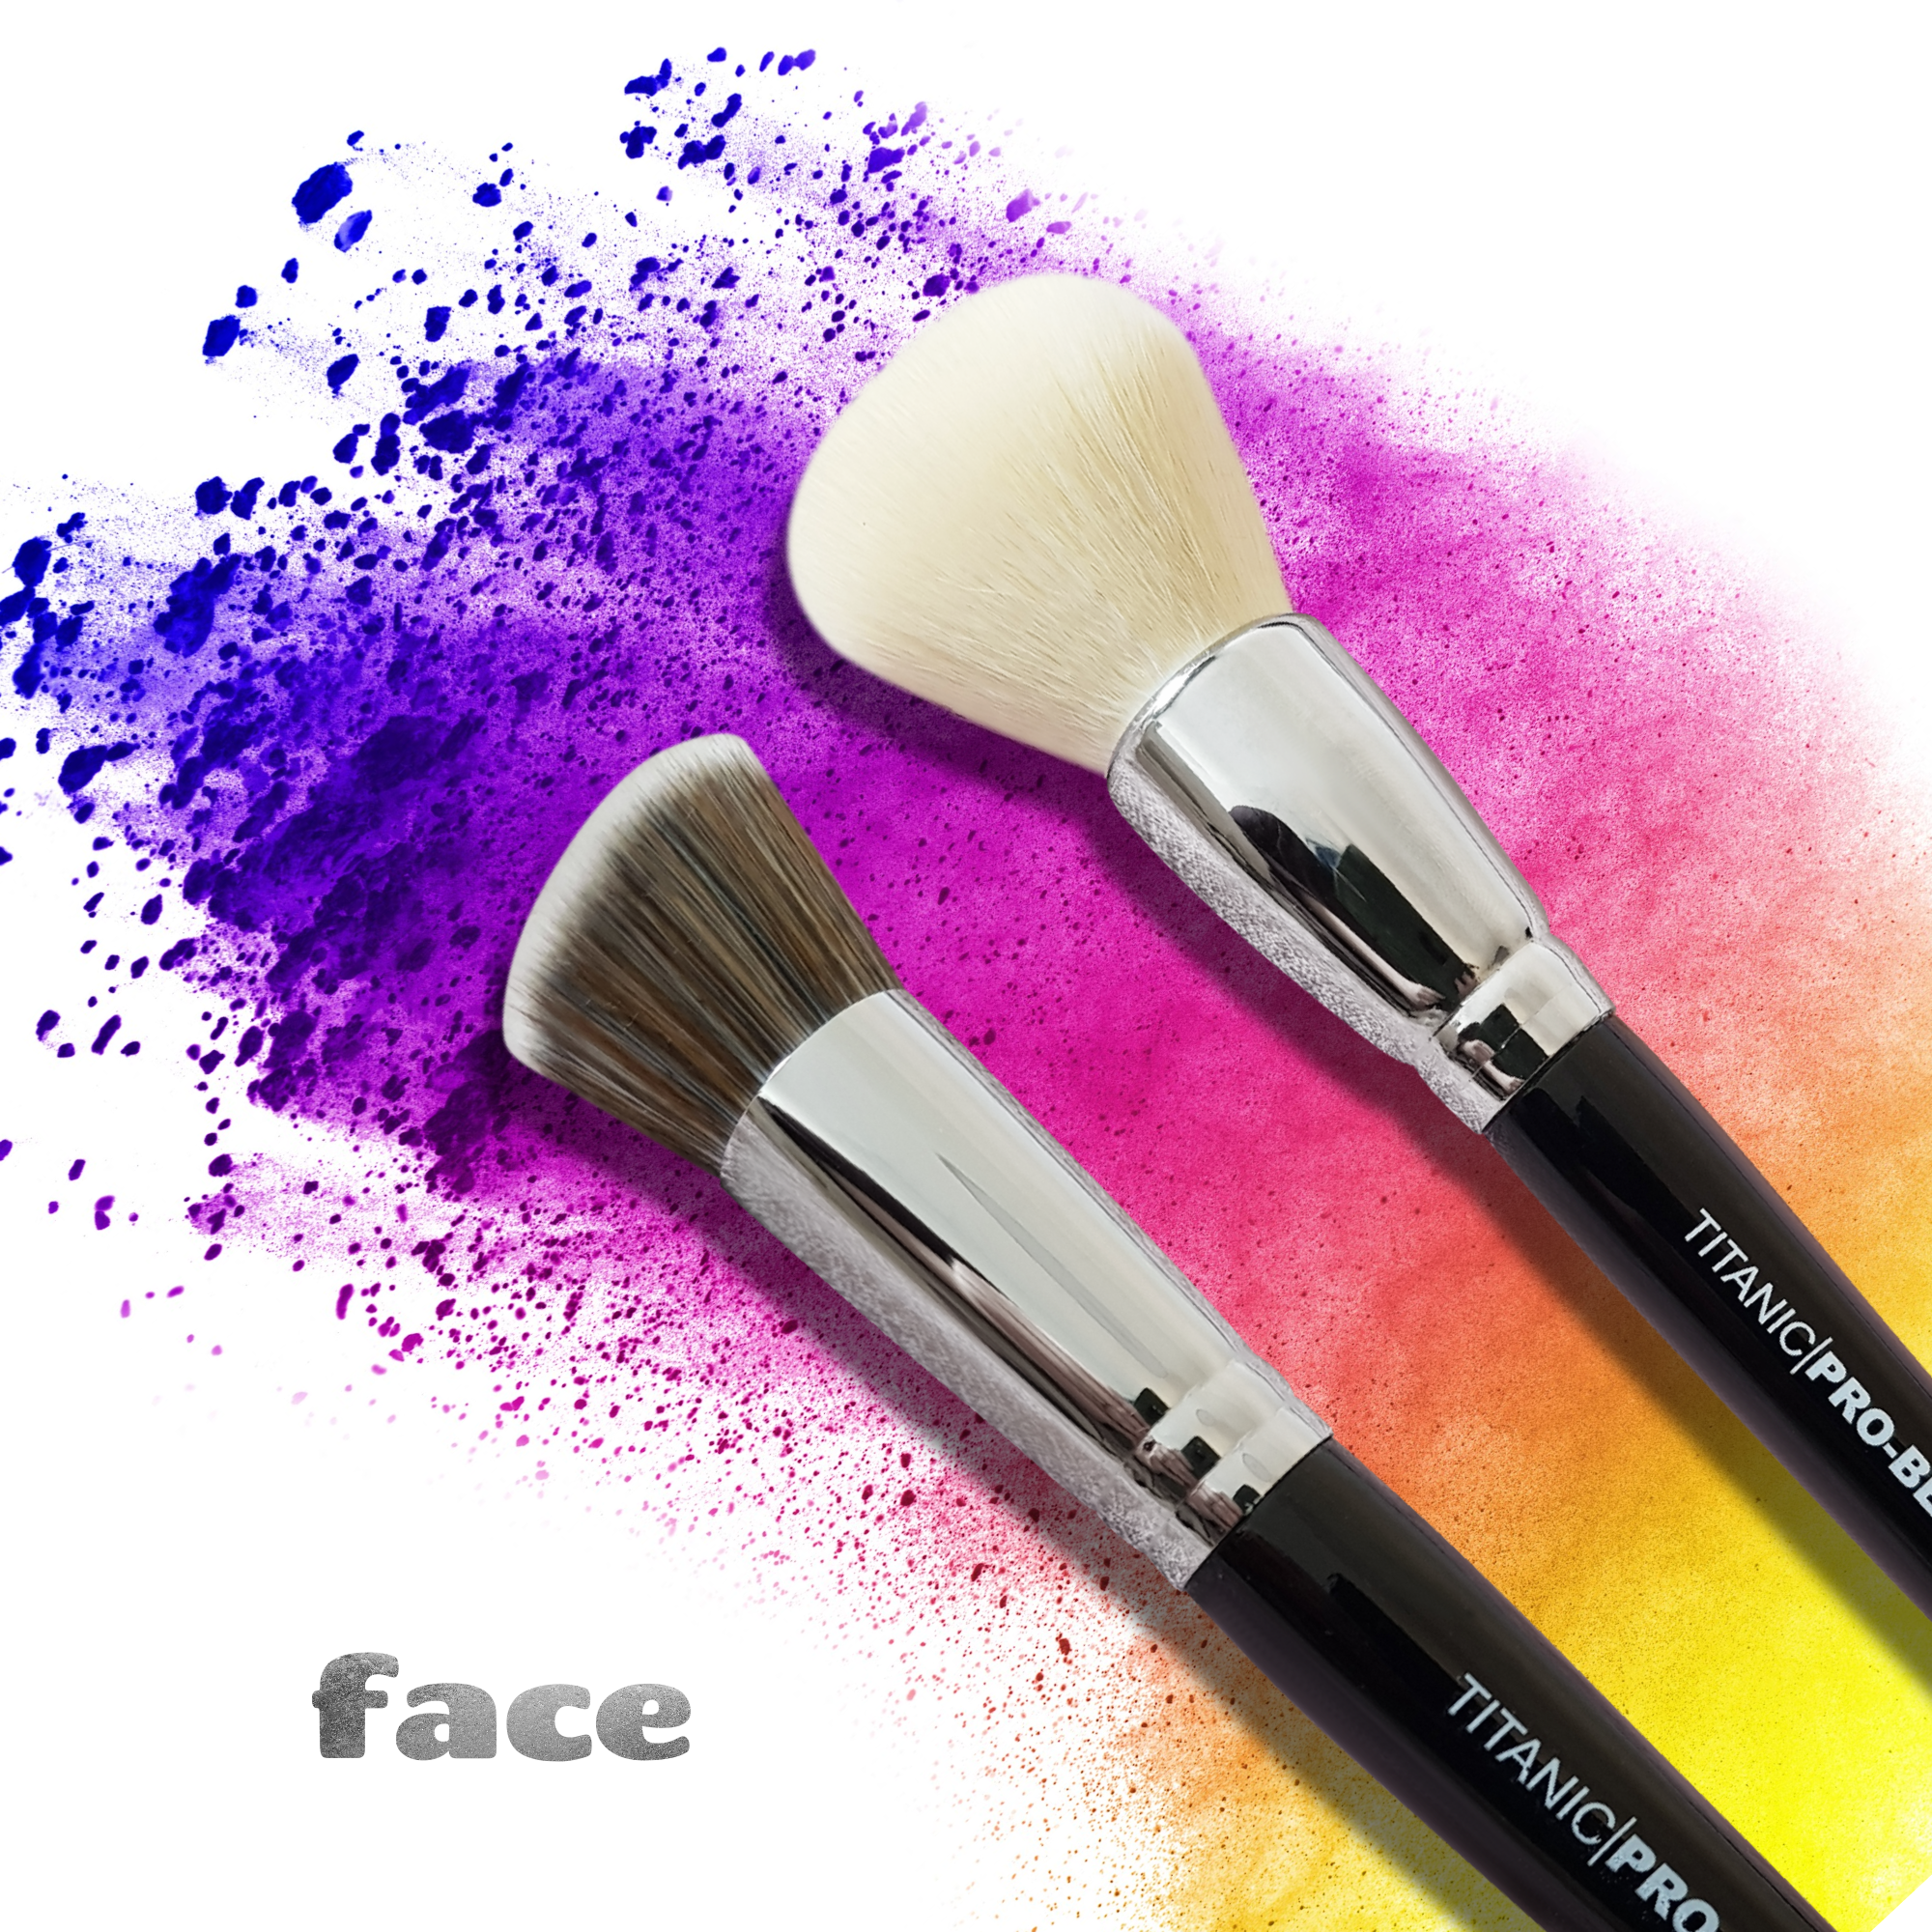 The Face Makeup Brush Collection